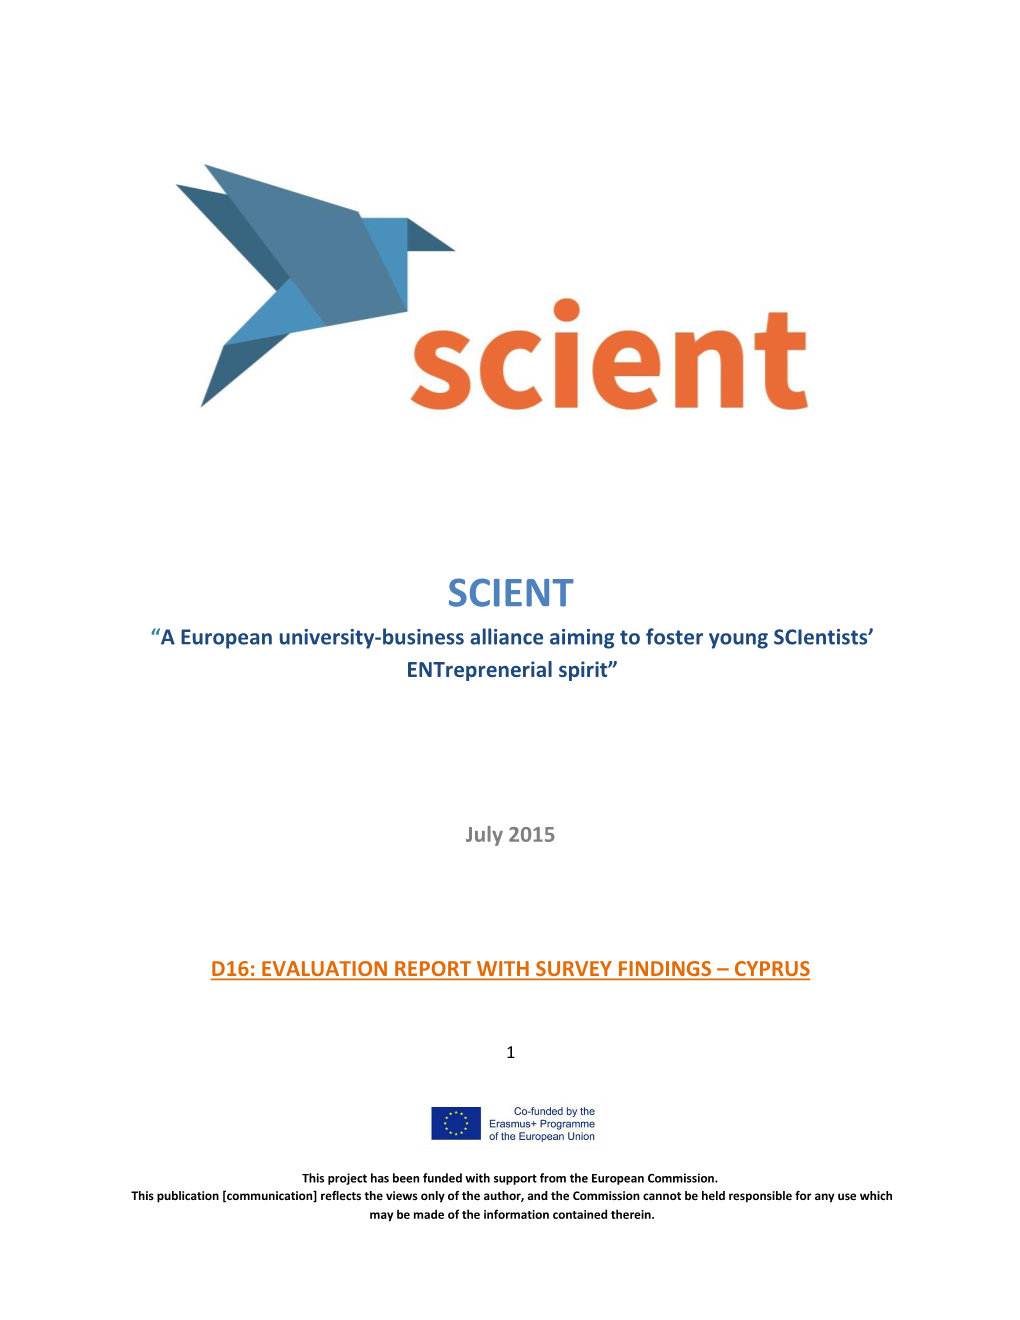 SCIENT “A European University-Business Alliance Aiming to Foster Young Scientists’ Entreprenerial Spirit”